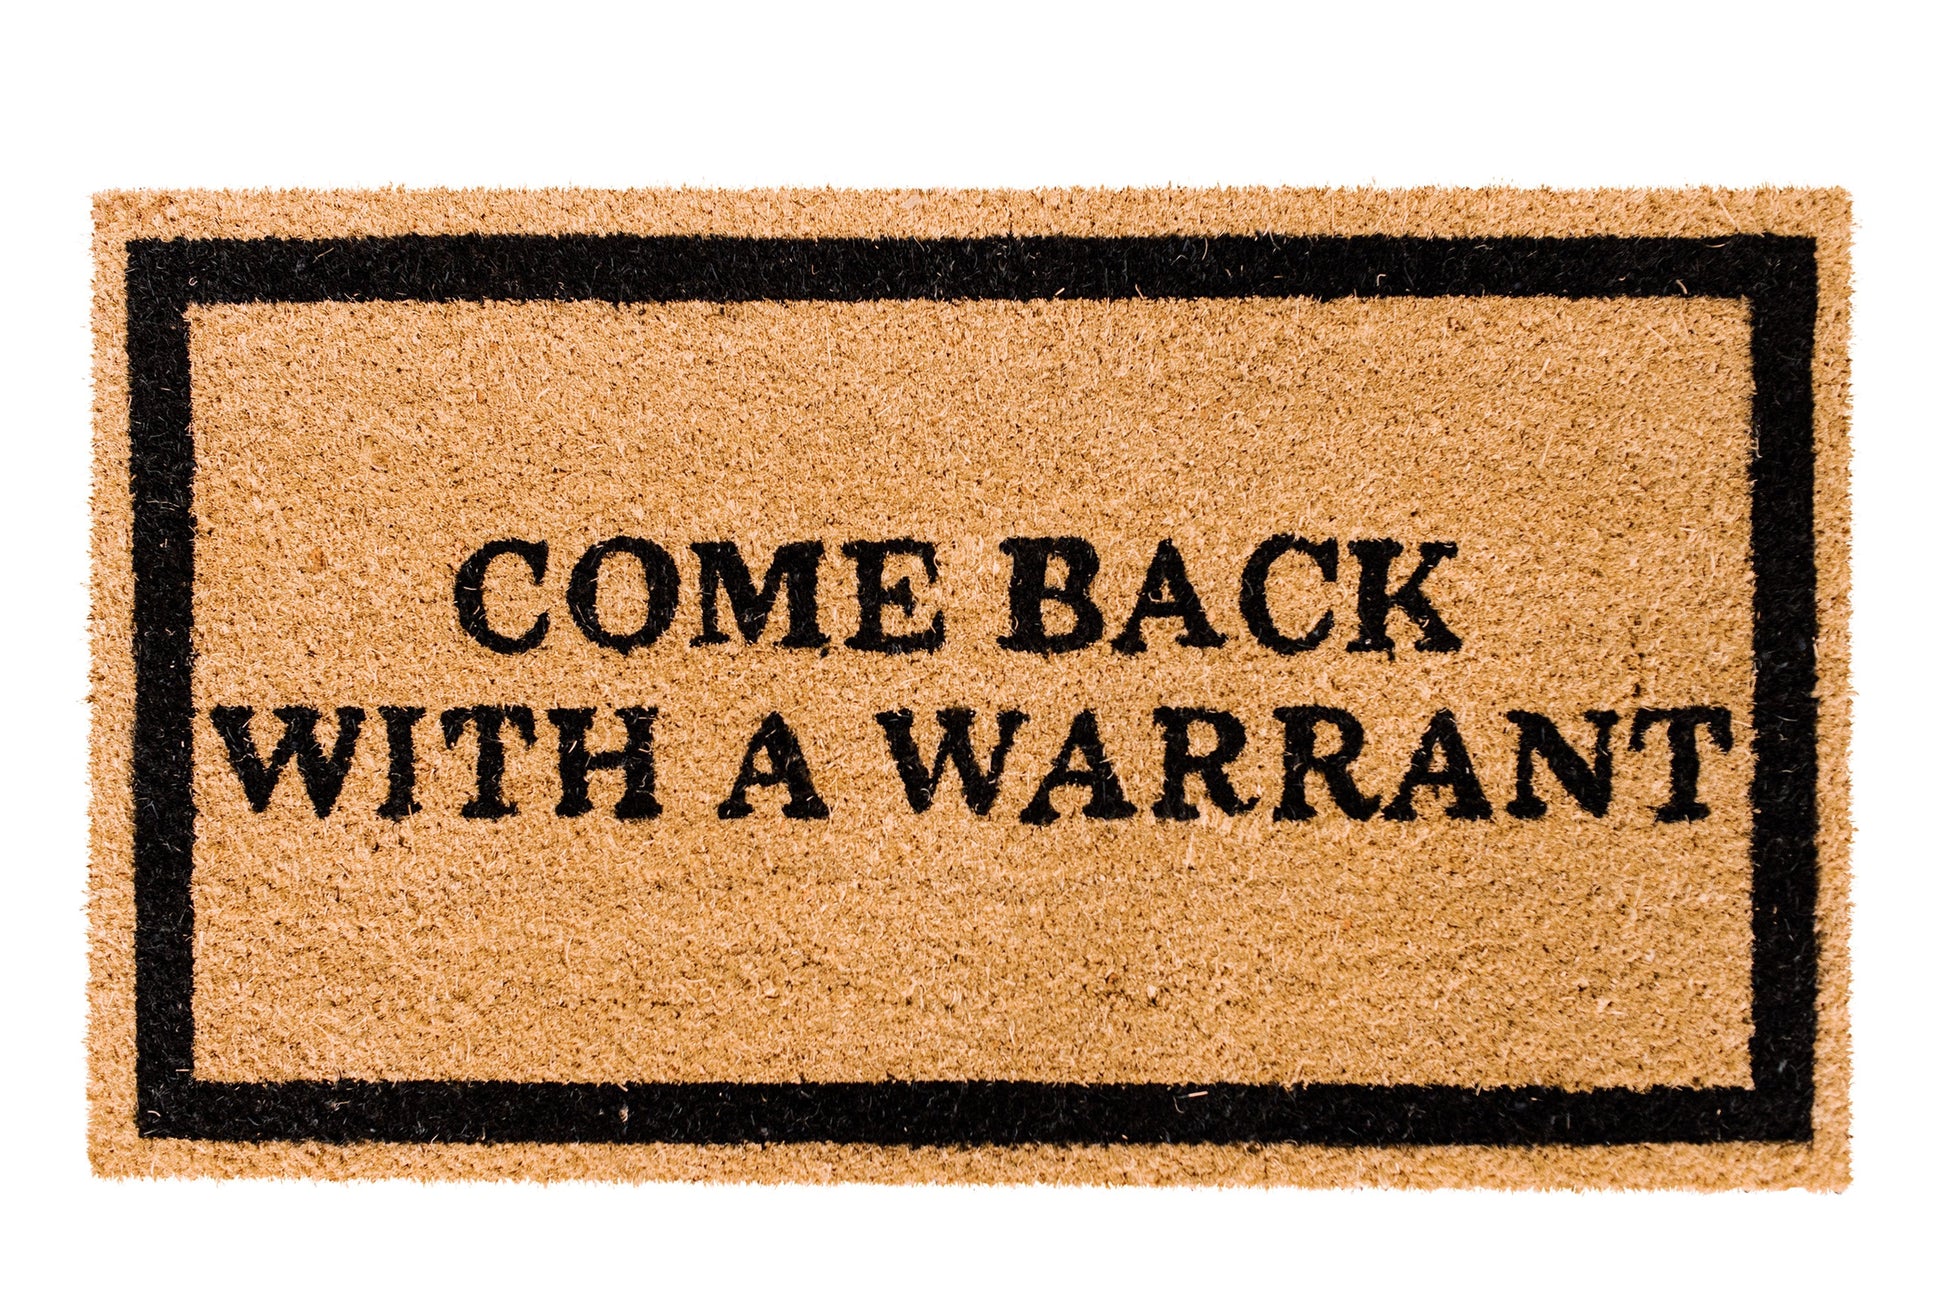 Theodore Magnus Natural Coir Doormat with non-slip backing - 17 x 30 - Outdoor / Indoor - Natural - Come Back with a Warrant